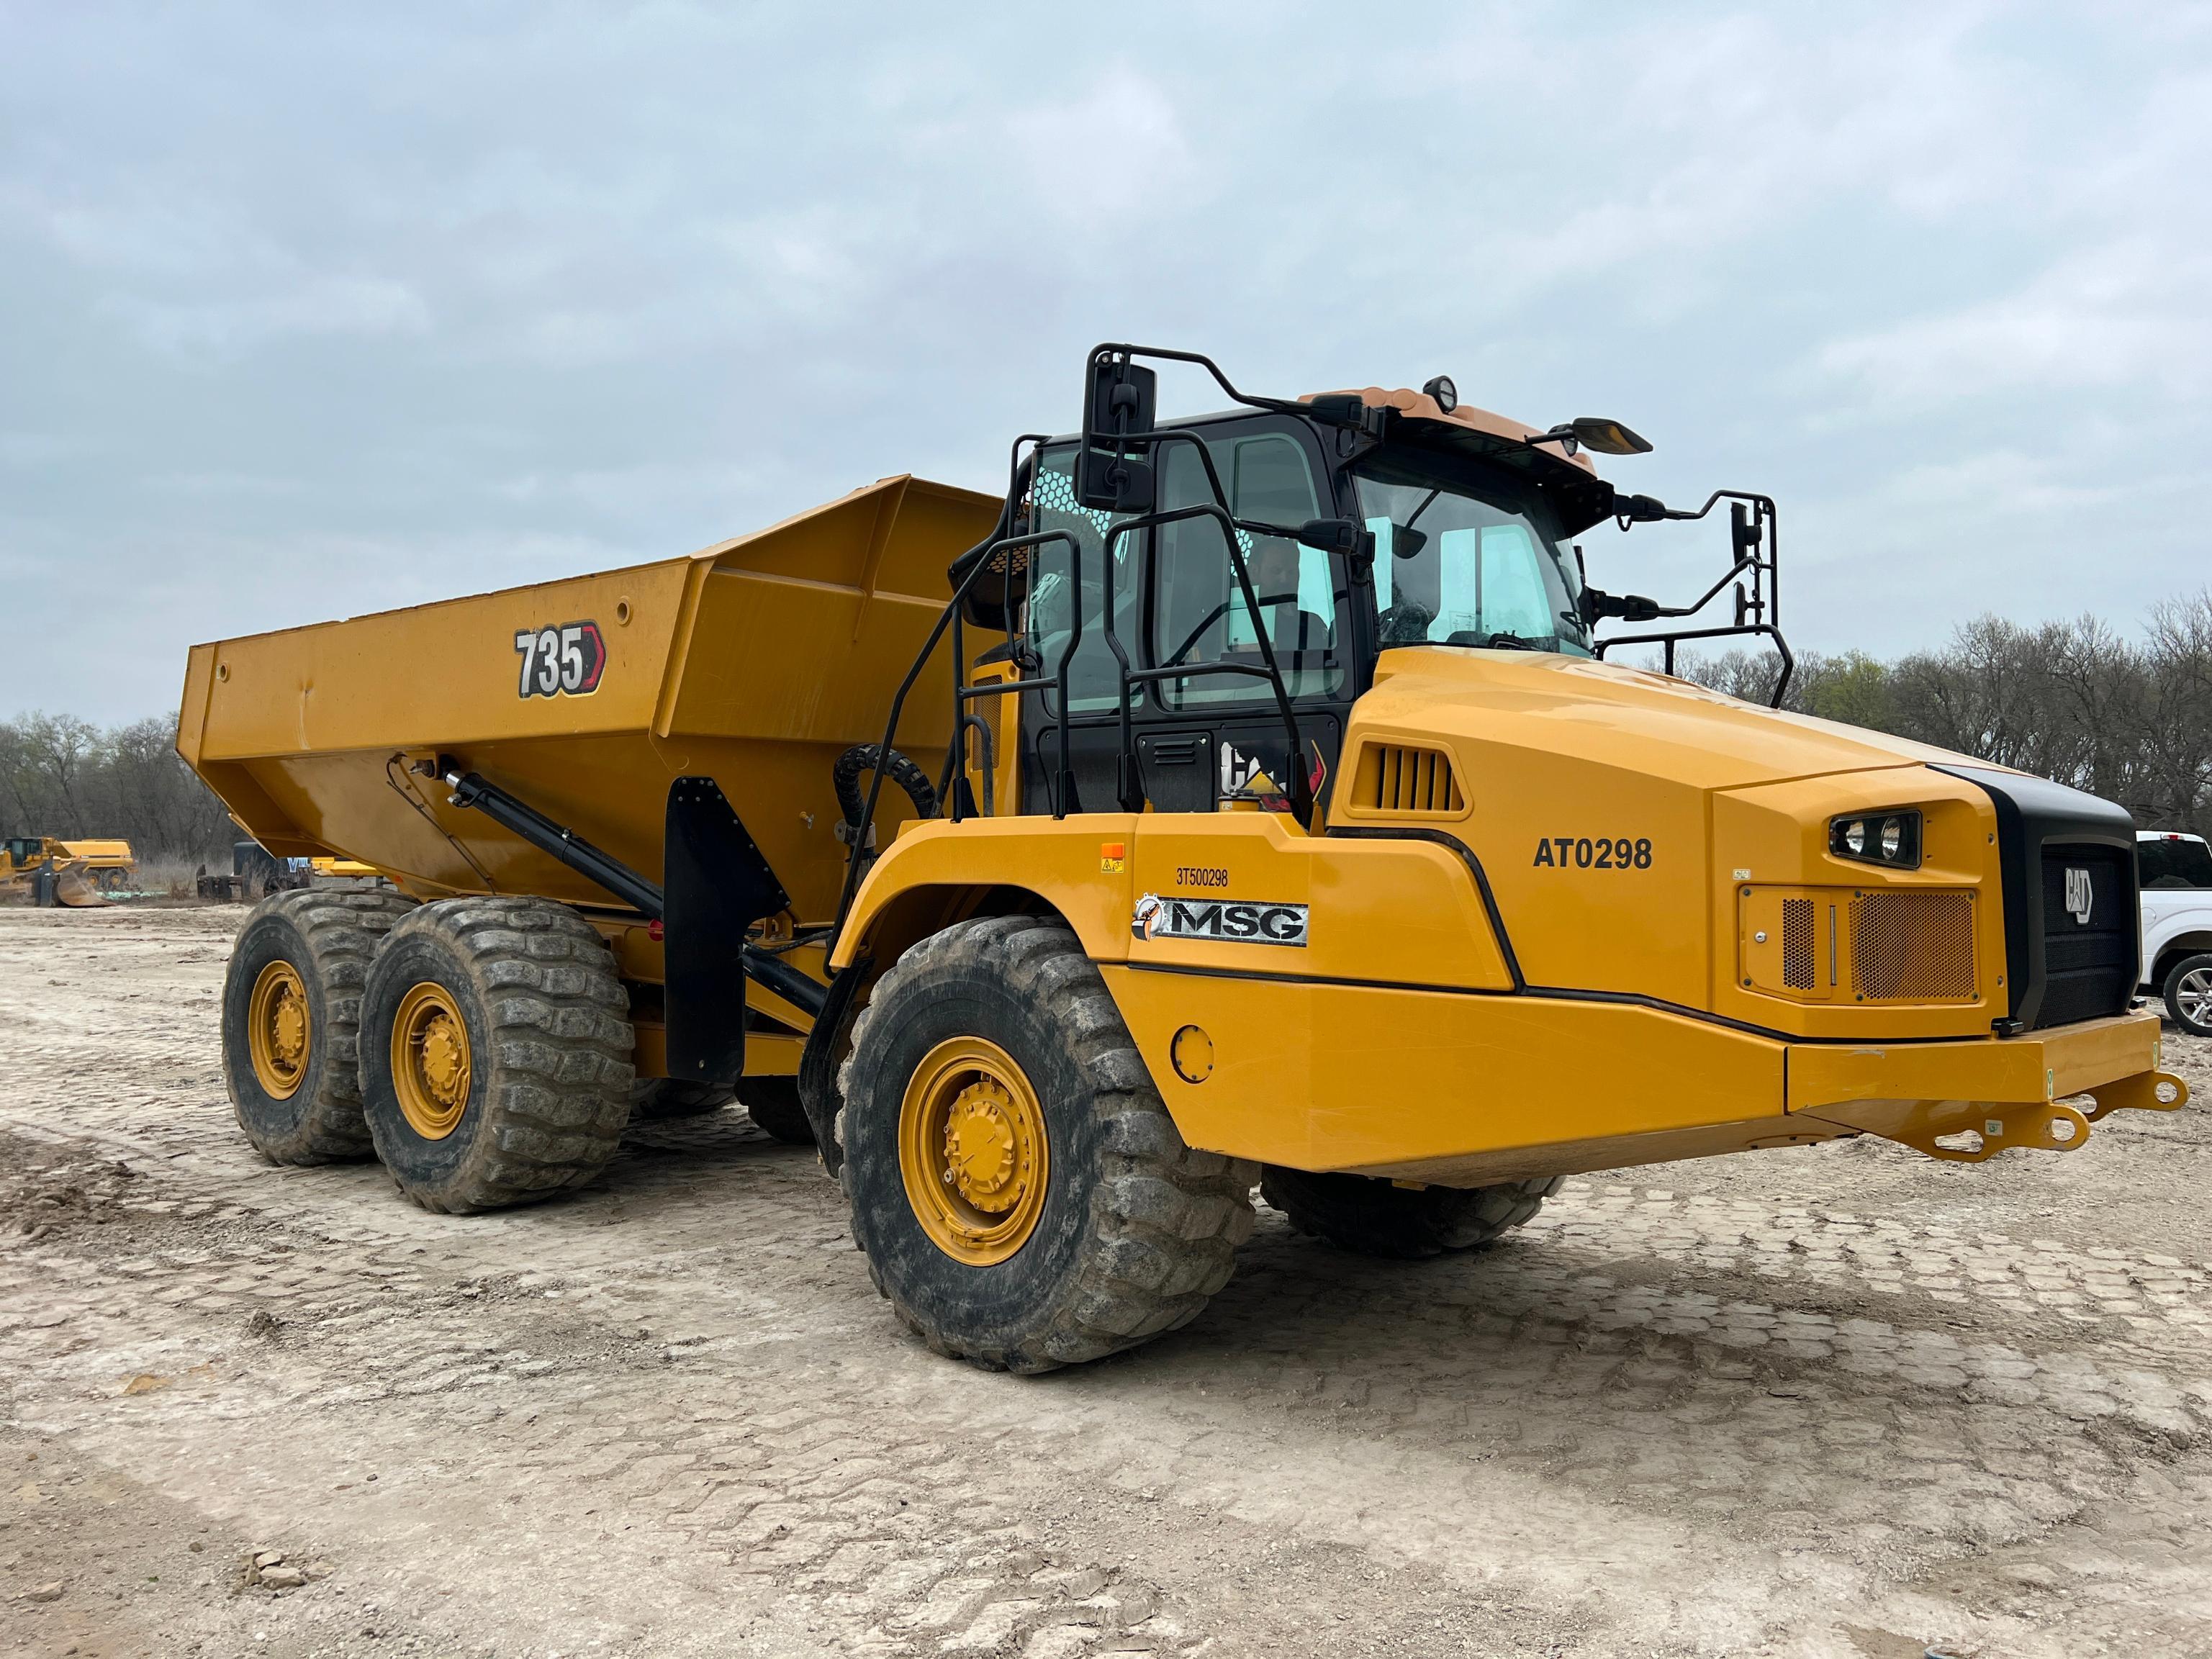 2021 CAT 735 ARTICULATED HAUL TRUCK SN:CAT00735E3T500298 6x6, powered by Cat diesel engine, equipped